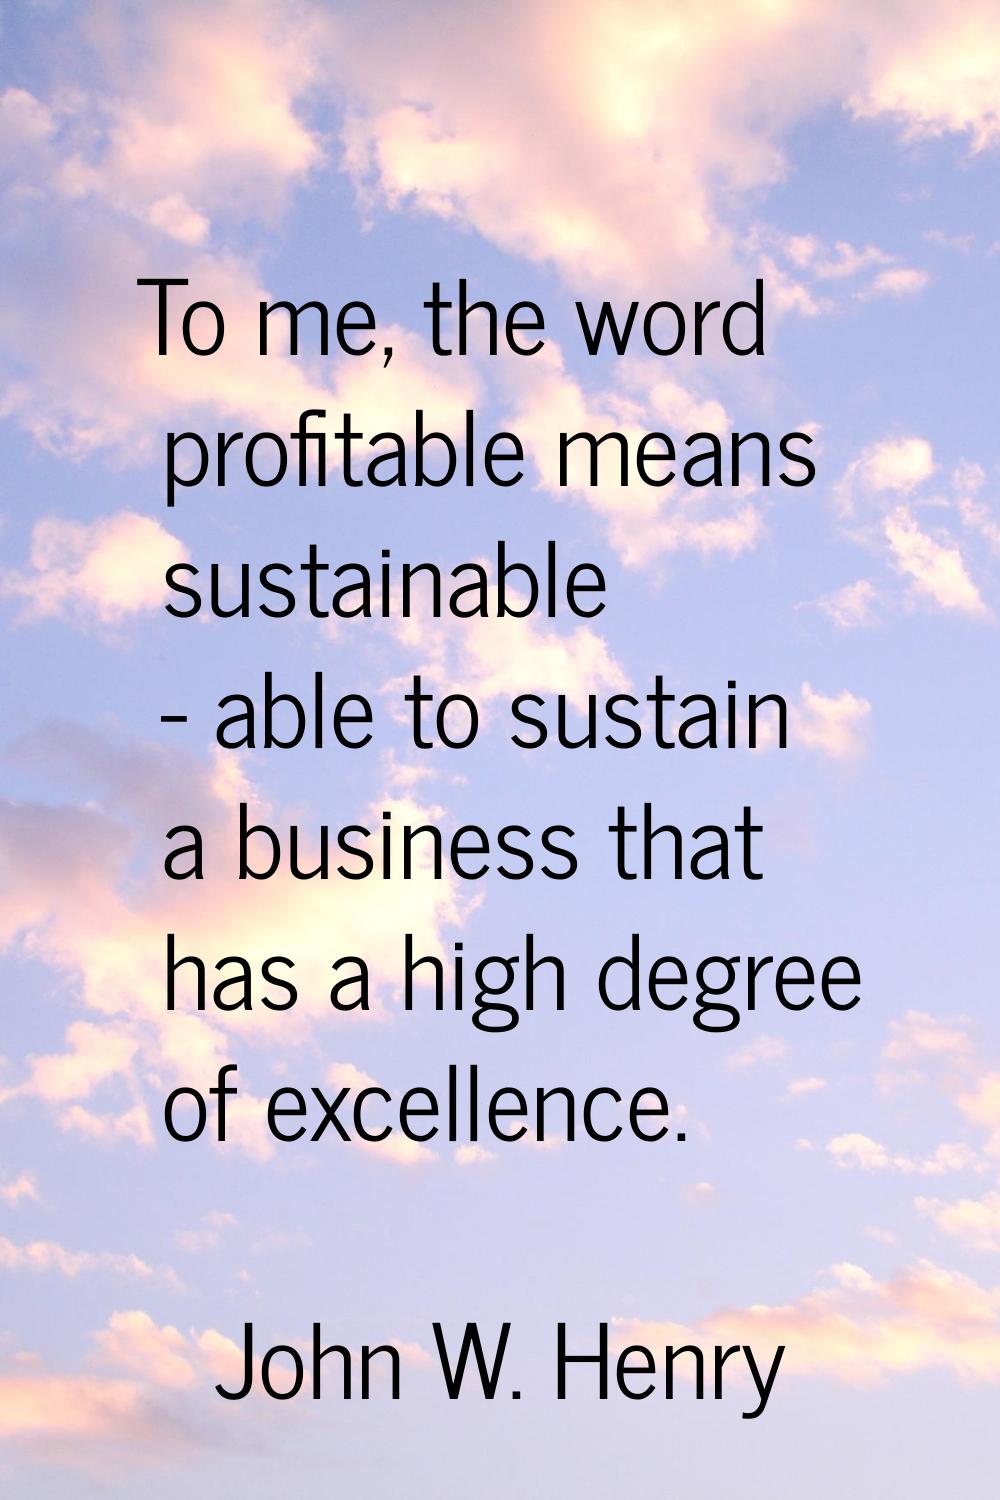 To me, the word profitable means sustainable - able to sustain a business that has a high degree of